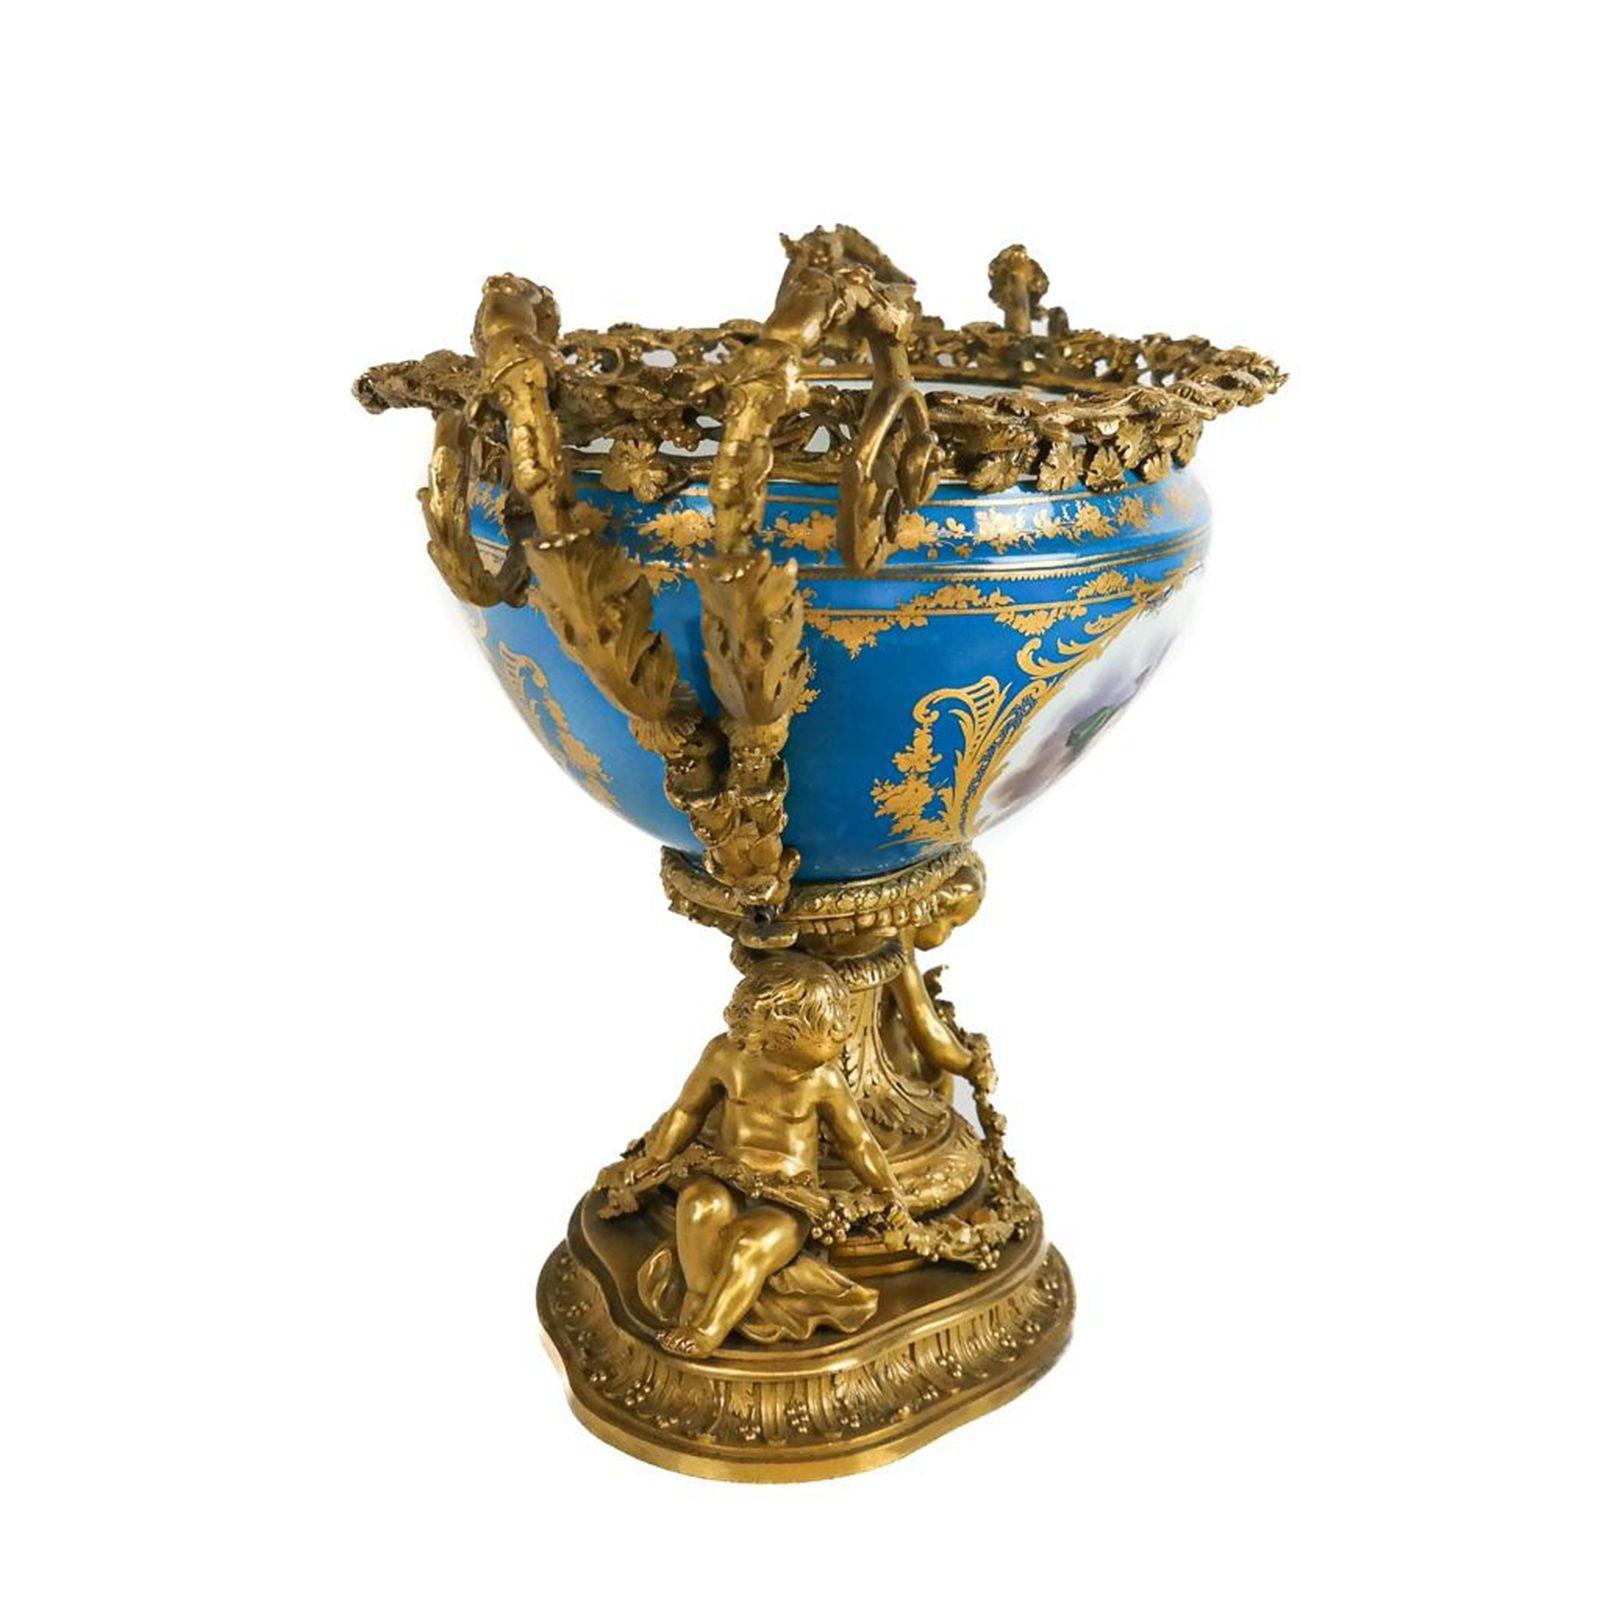 Graceful porcelain and gilt bronze centerpiece made in France in the late 19th century, featuring colorful floral scenes painted on the porcelain, capturing the beauty of nature. Adding to its charm, three cherubs are depicted in the porcelain,